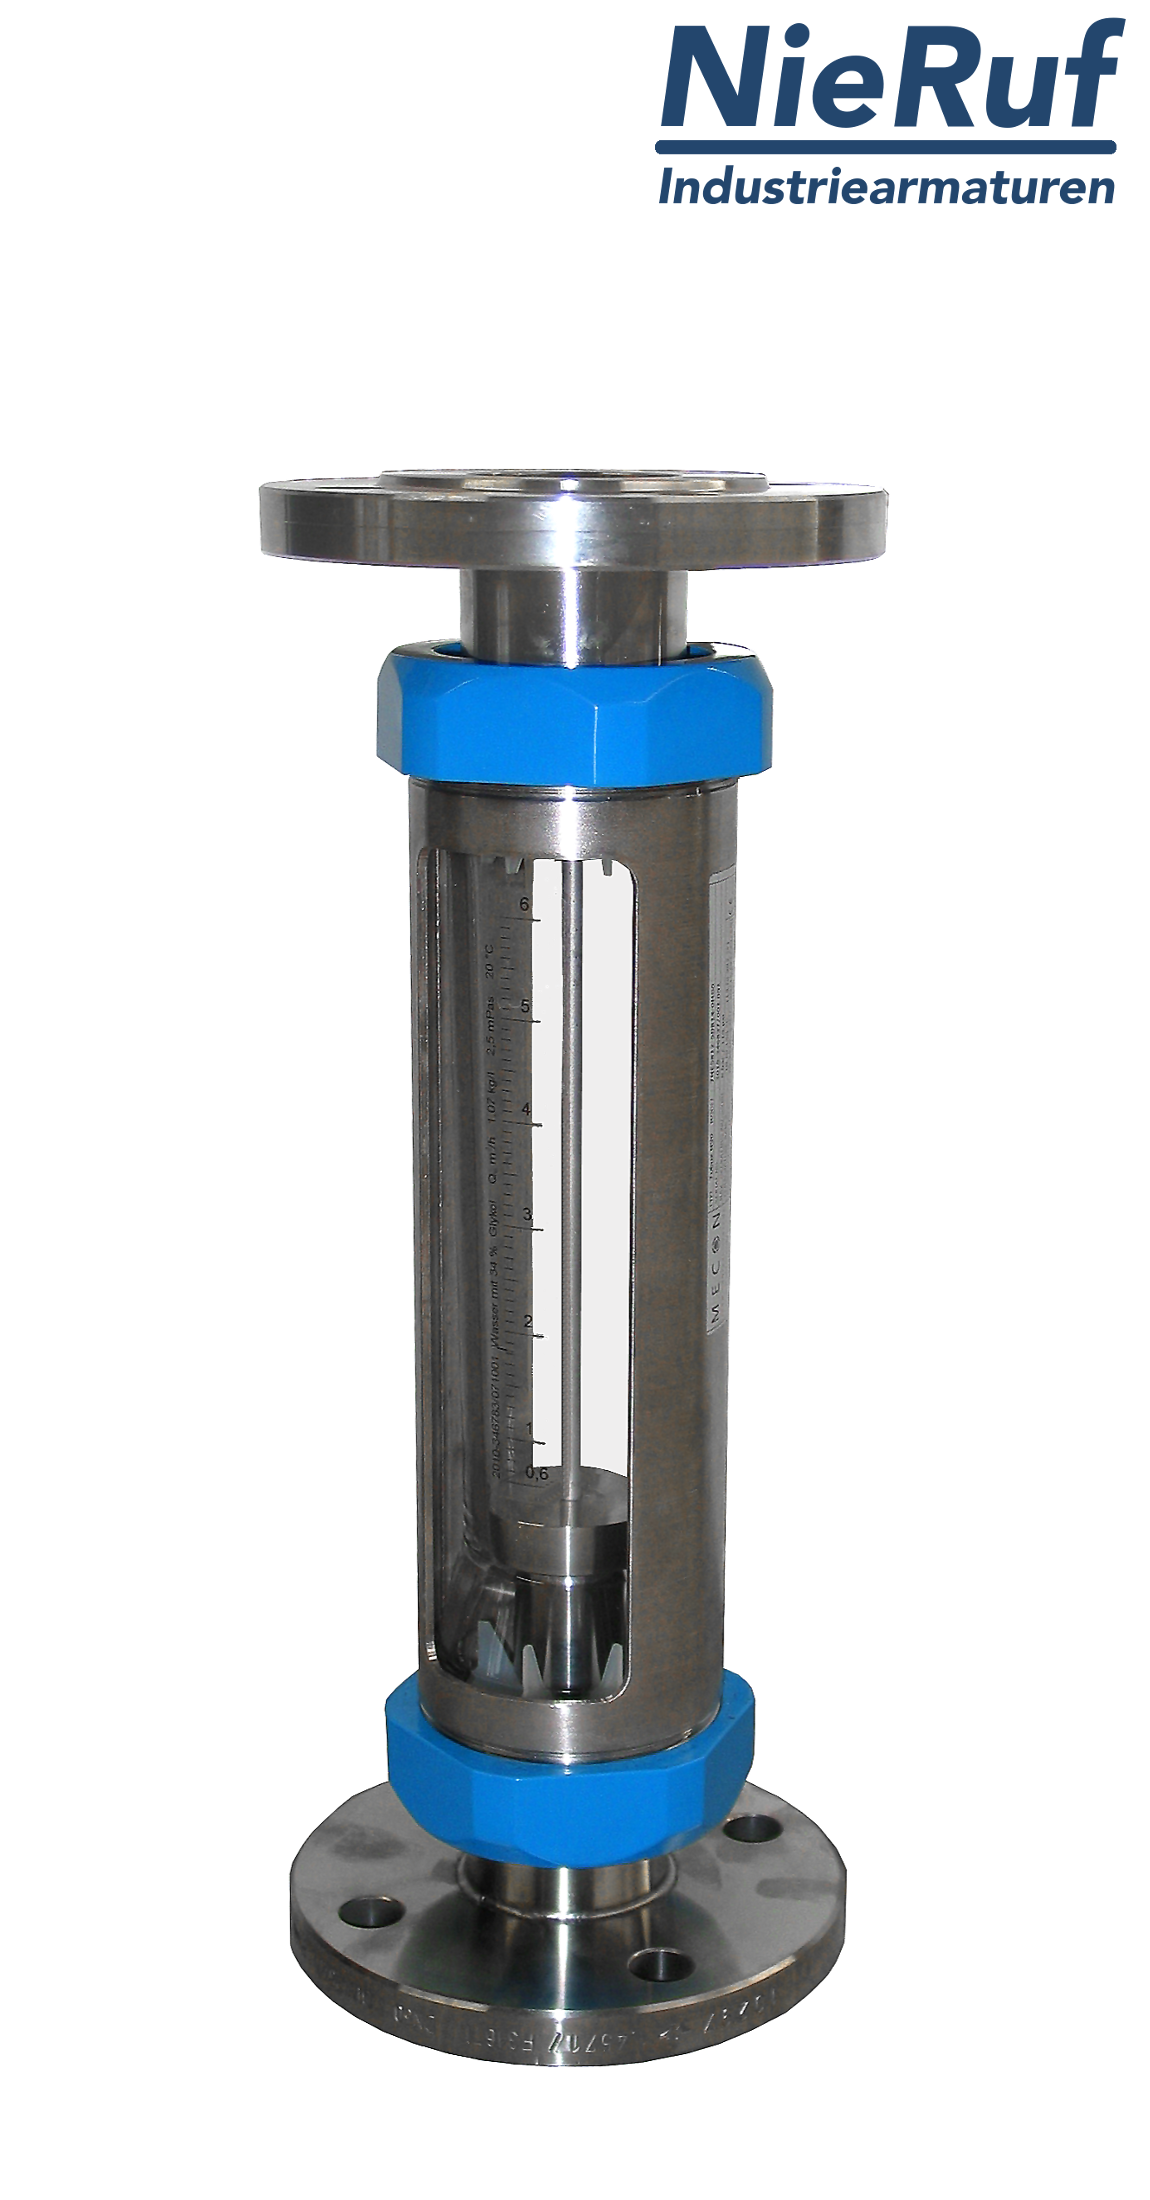 Variable area flowmeter stainless steel + borosilicate flange DN25 4.0 - 40.0 l/h water FKM